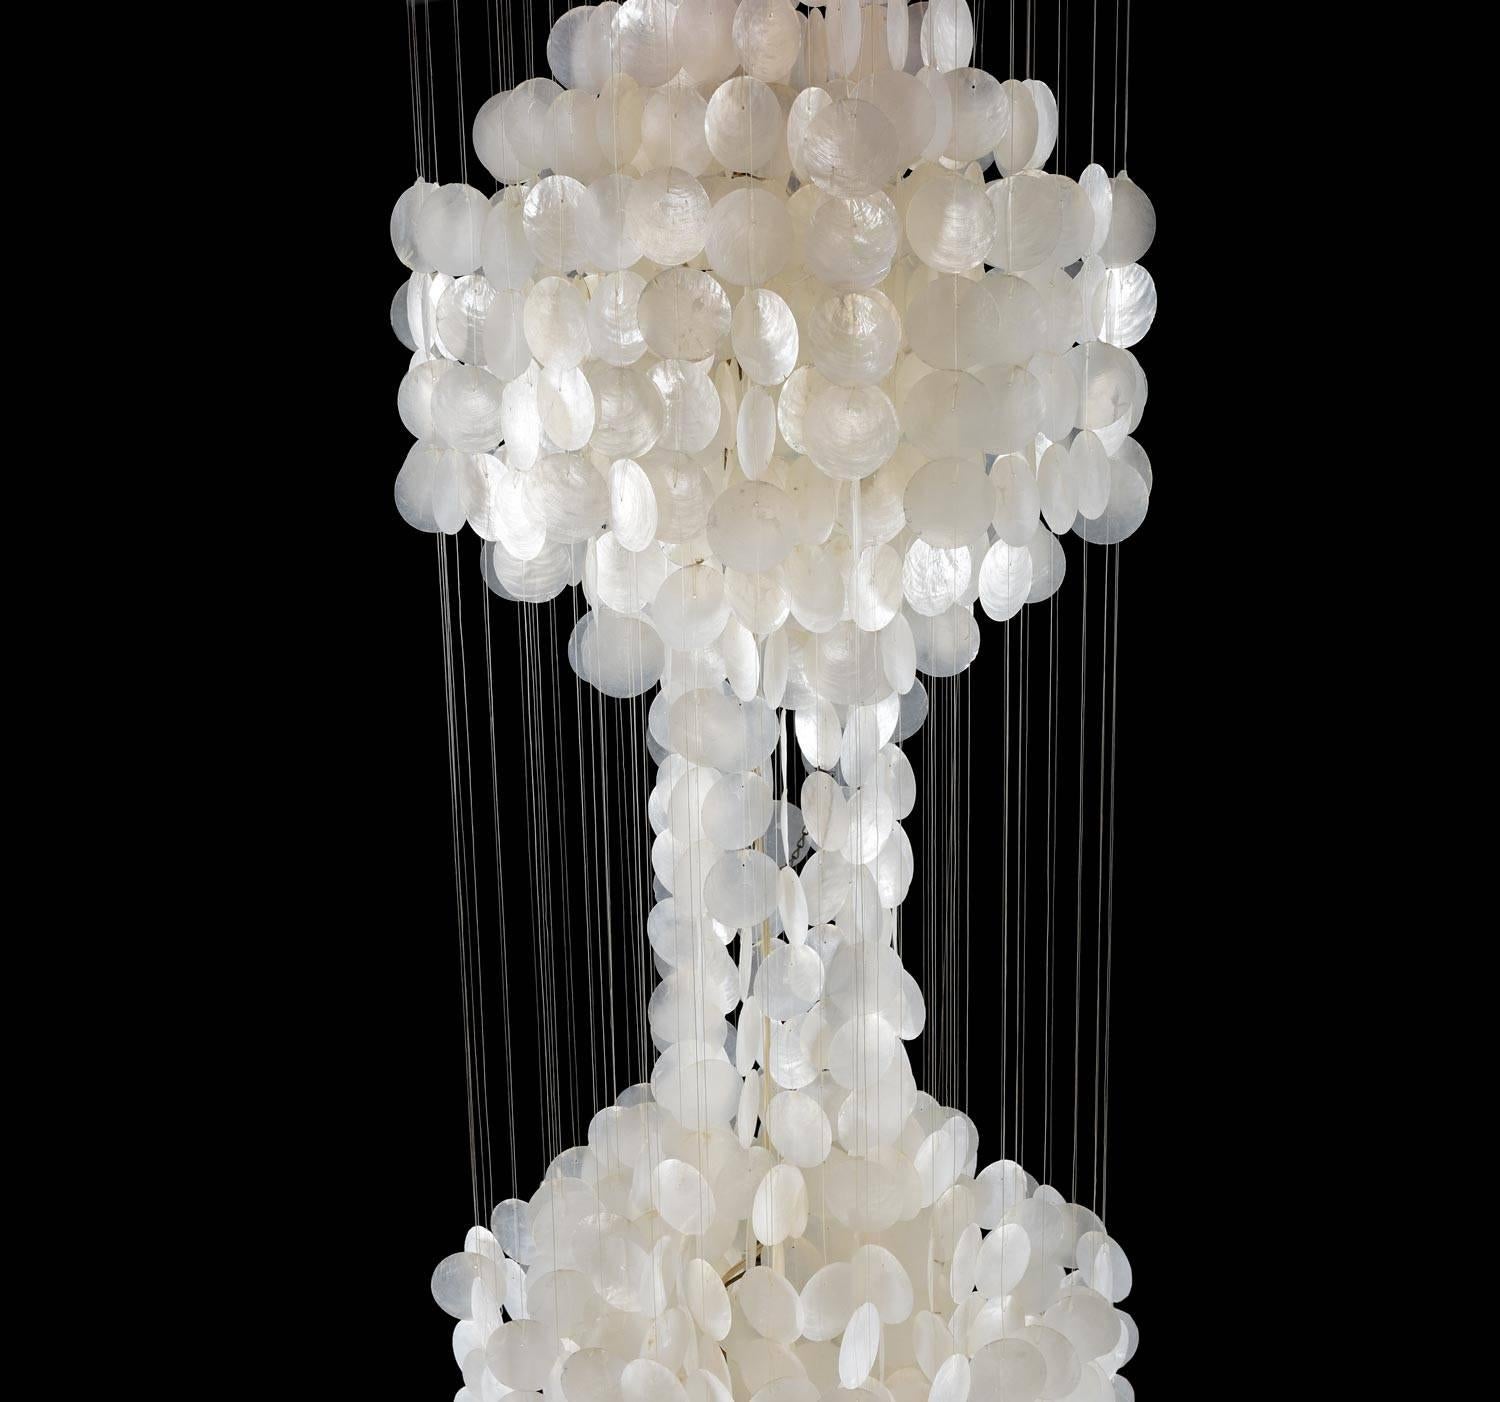 Breathtaking huge capiz shell hanging chandelier. 7 feet tall! Ethereal light is diffused from three points. A statement piece that will make a lasting impression. Imagine this cascading from a stairwell or vaulted ceiling. Pure magic!

The top